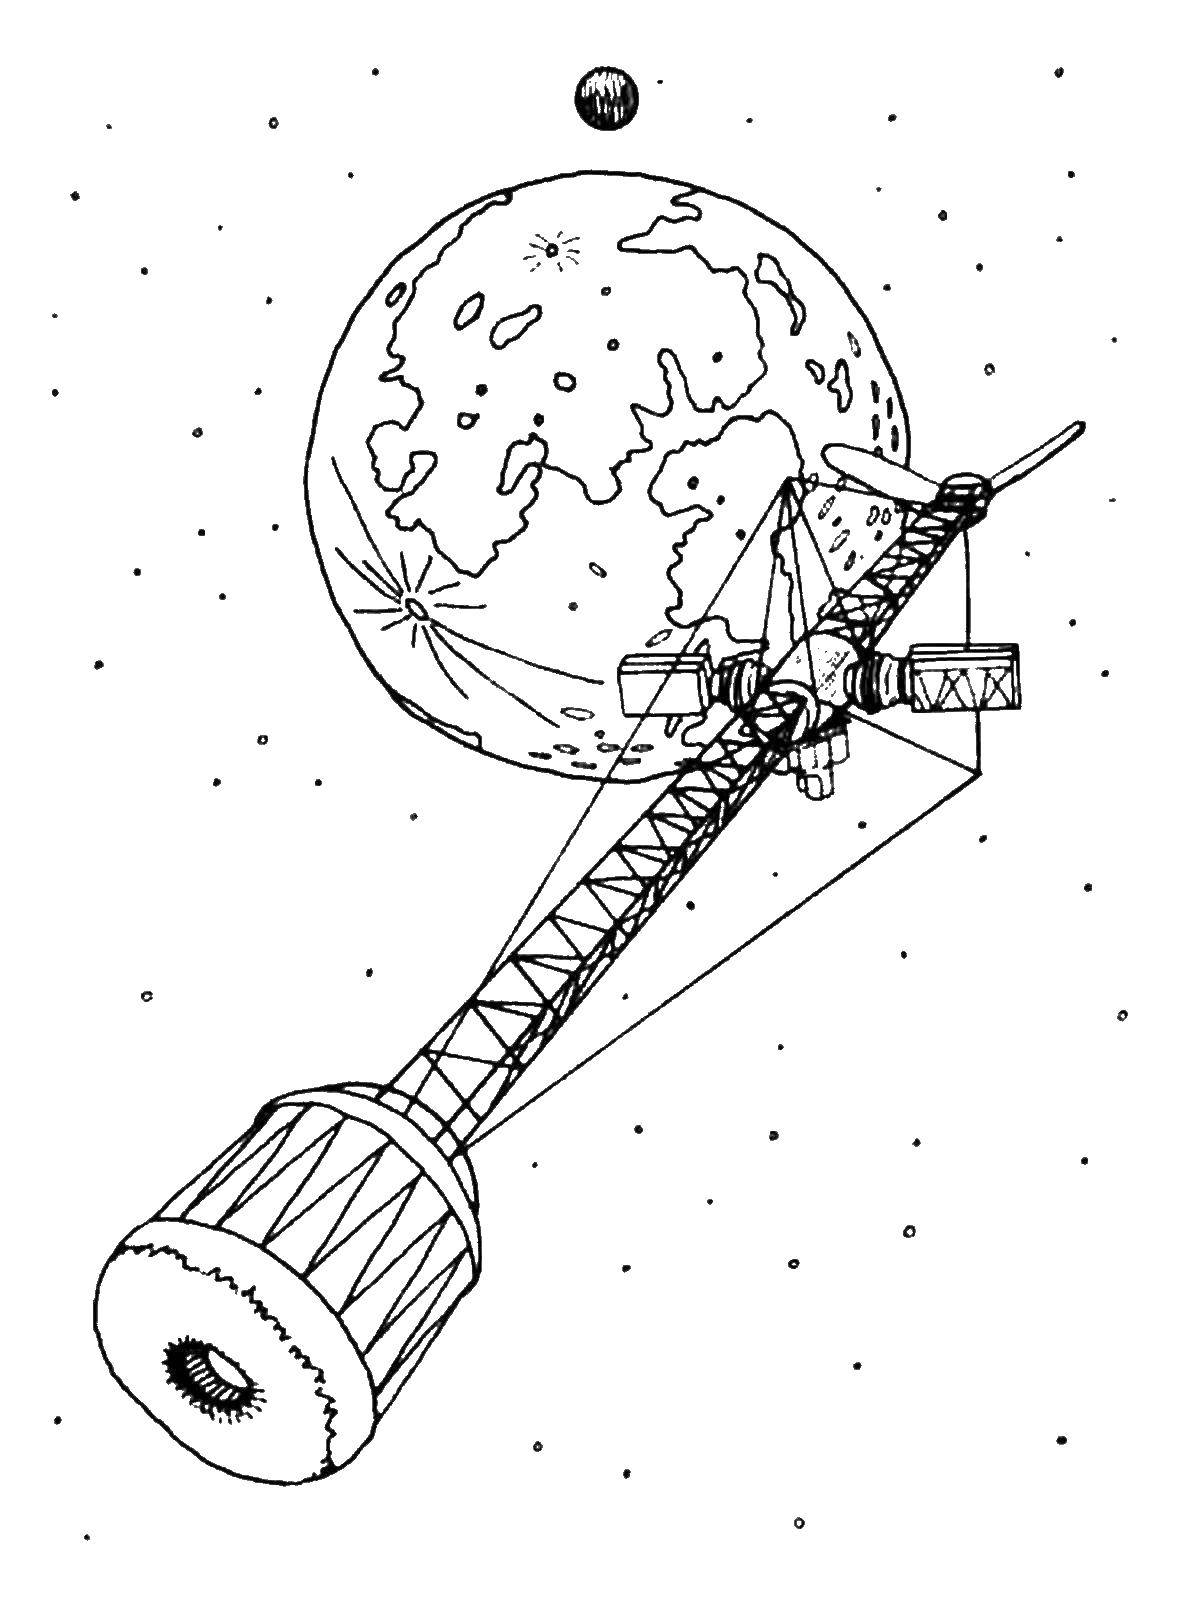 Coloring Satellite in space. Category space. Tags:  Satellite, space.